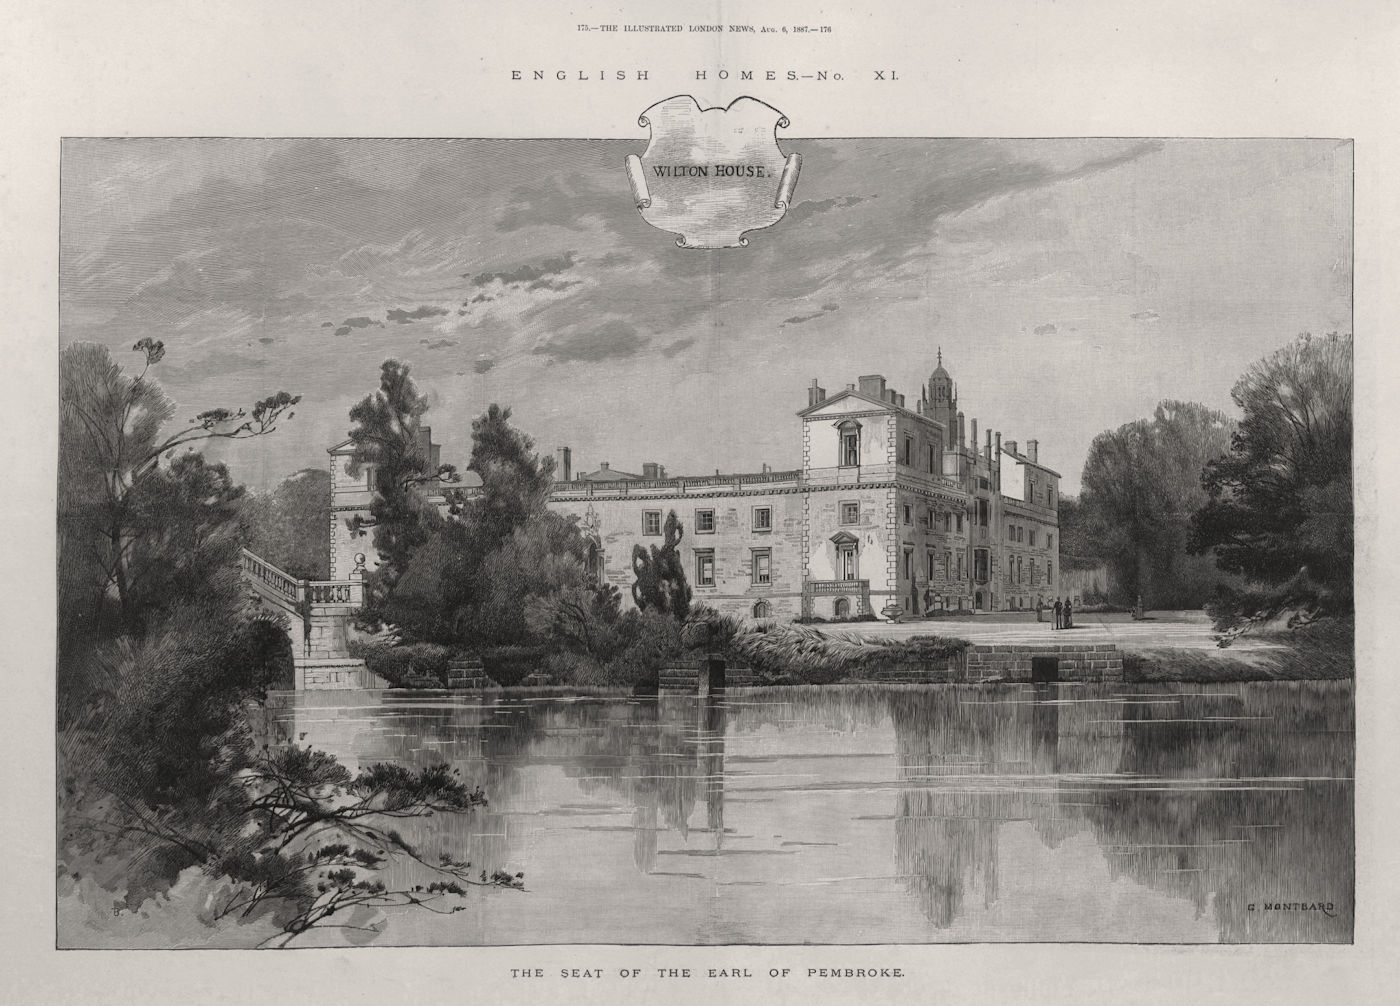 Wilton House: The seat of the Earl of Pembroke. Wiltshire. Historic Houses 1887